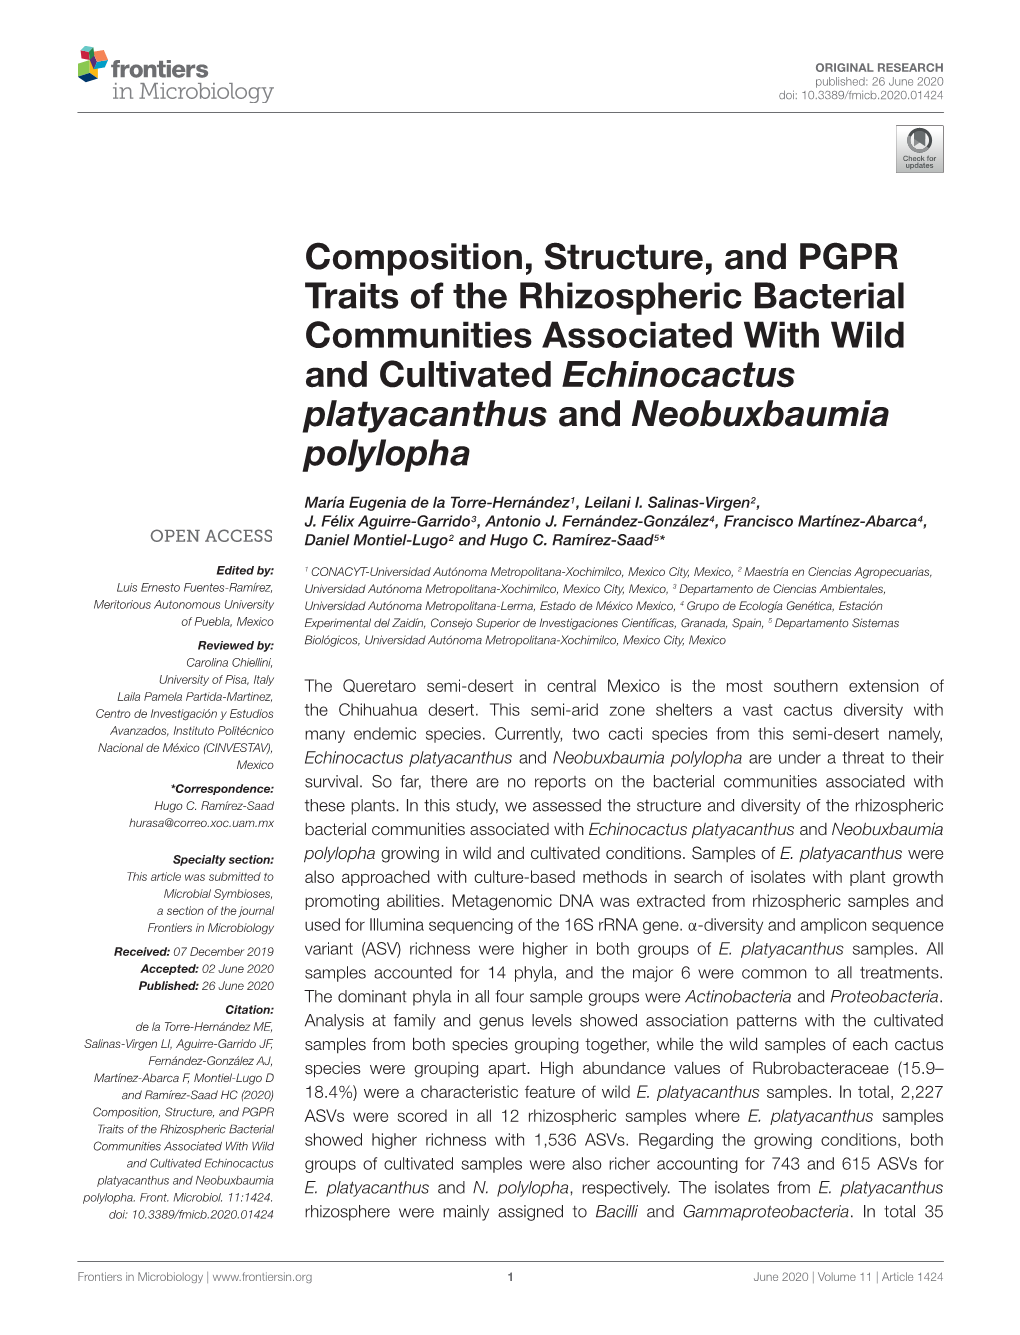 Composition, Structure, and PGPR Traits of the Rhizospheric Bacterial